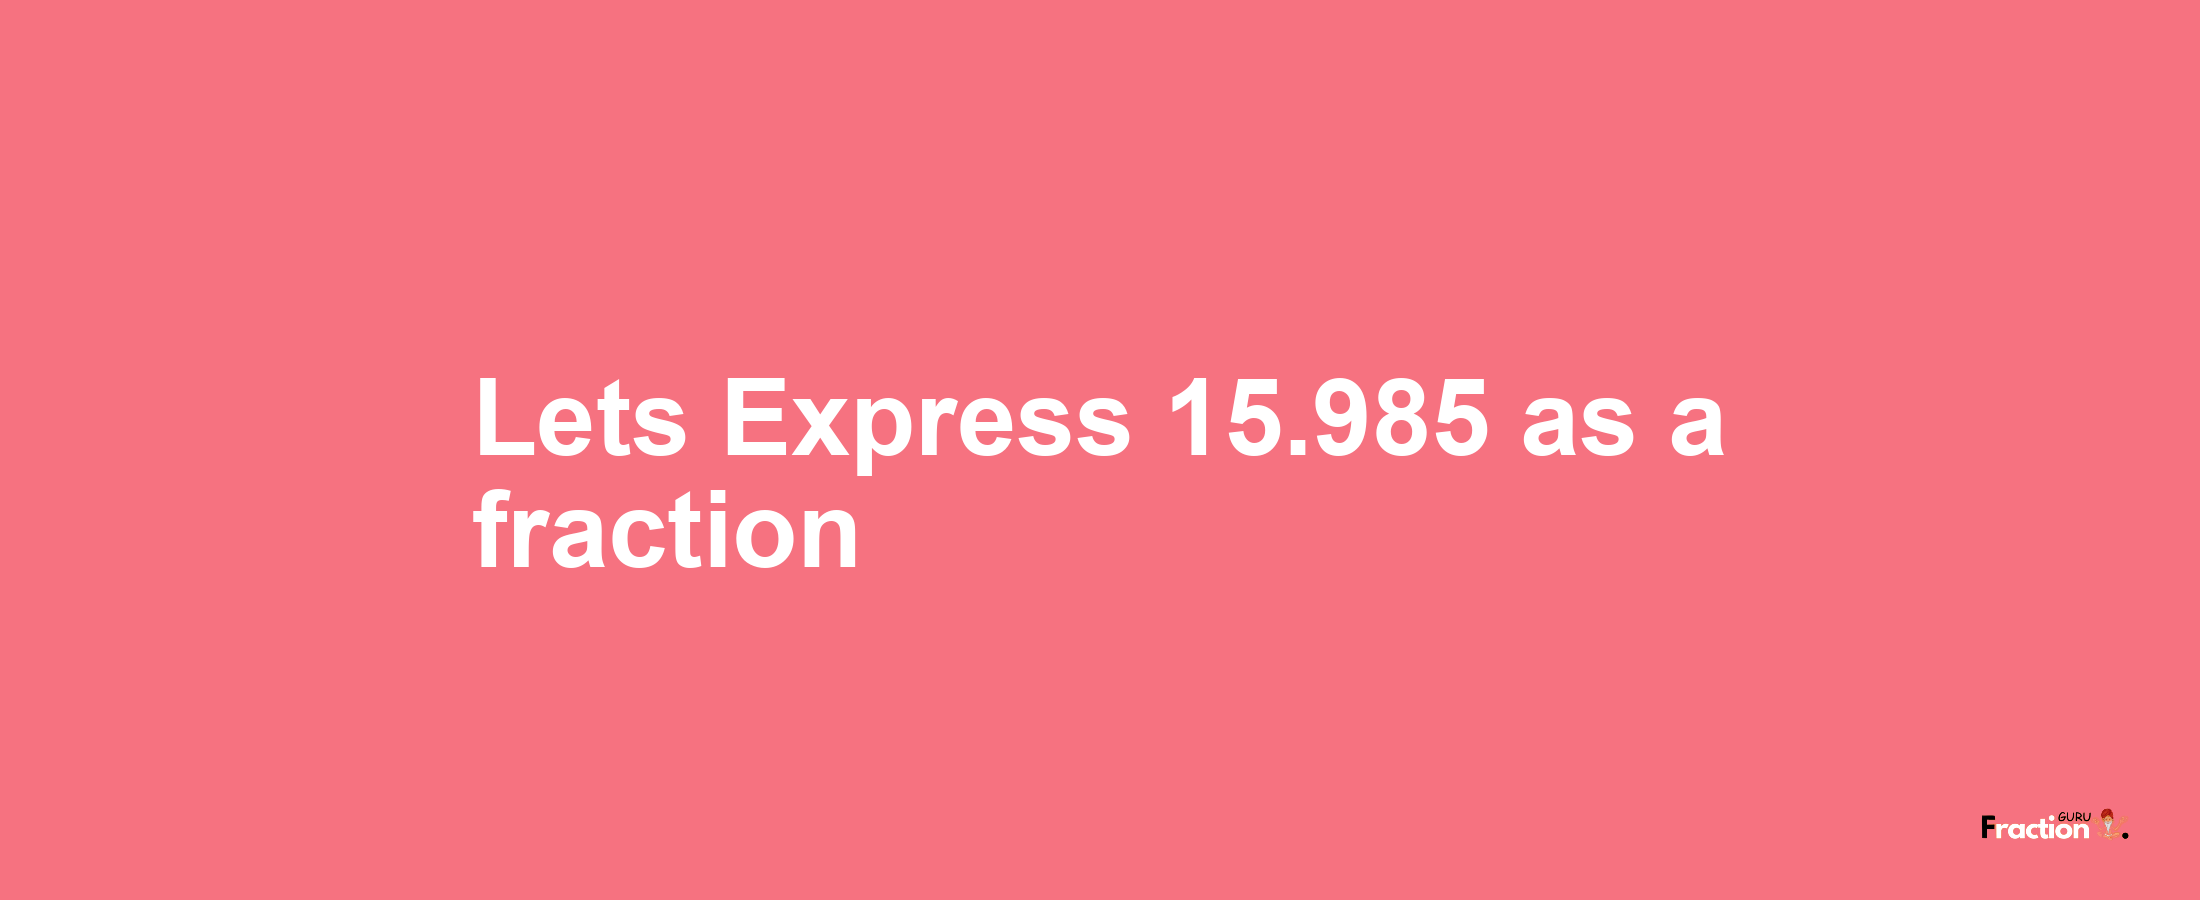 Lets Express 15.985 as afraction